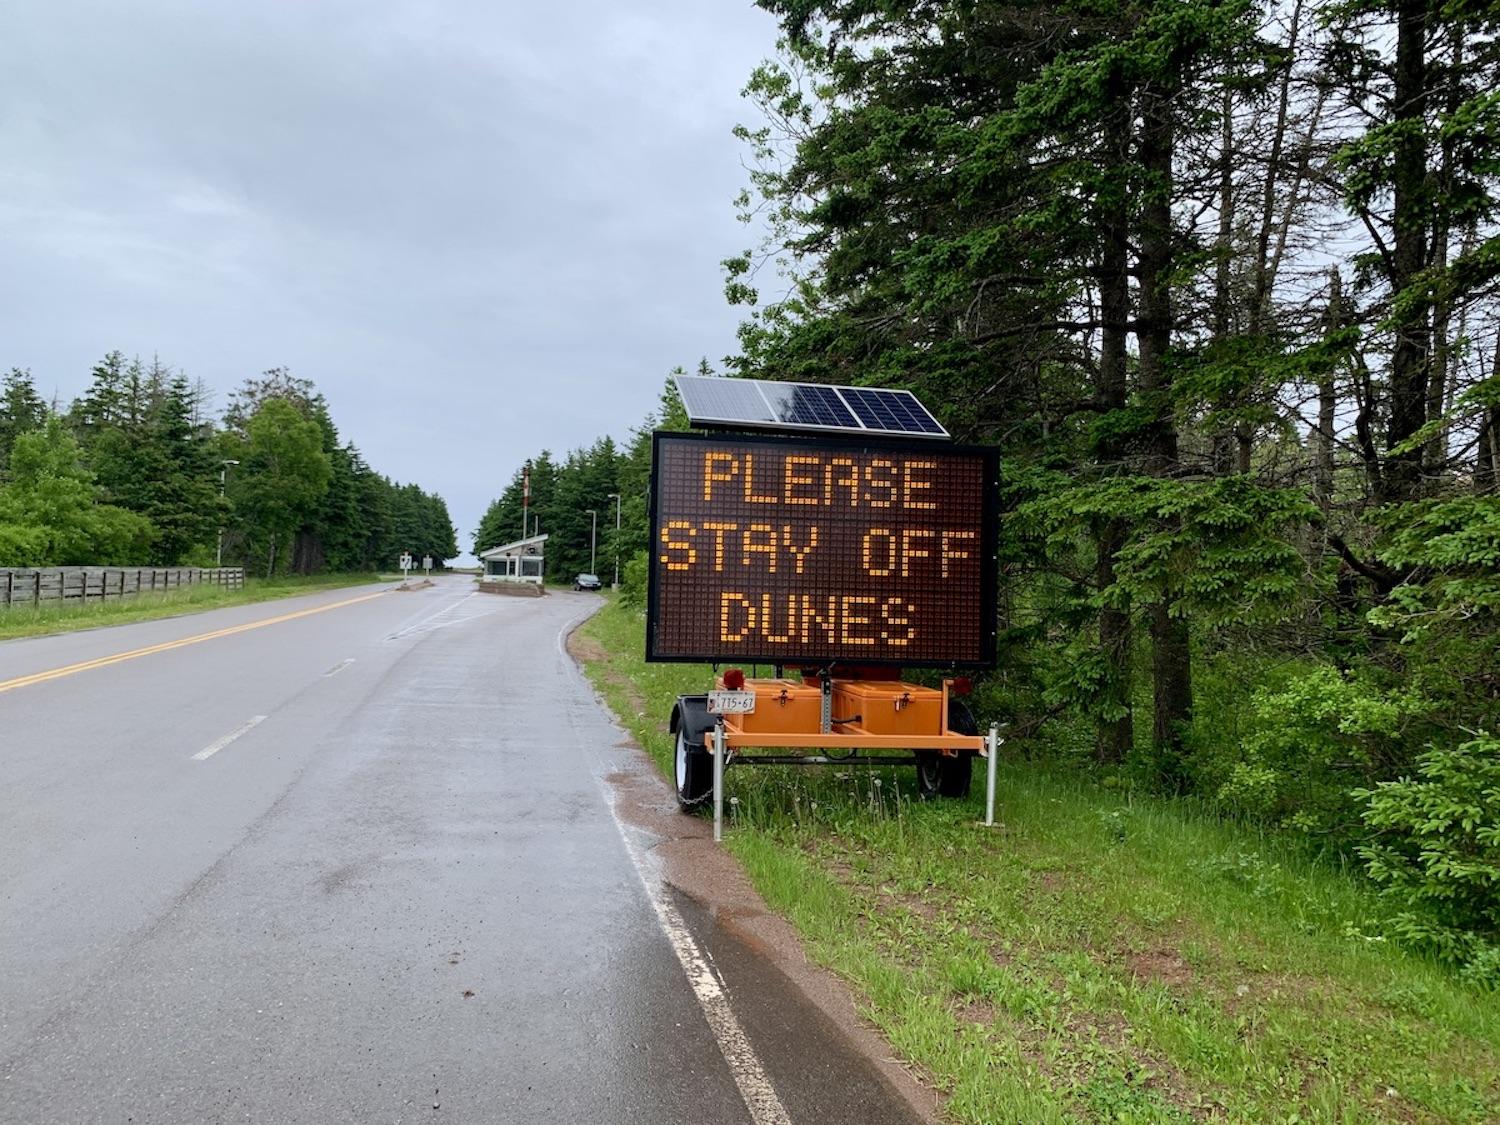 P.E.I. National Park hits visitors with dune protection messaging right when they enter.